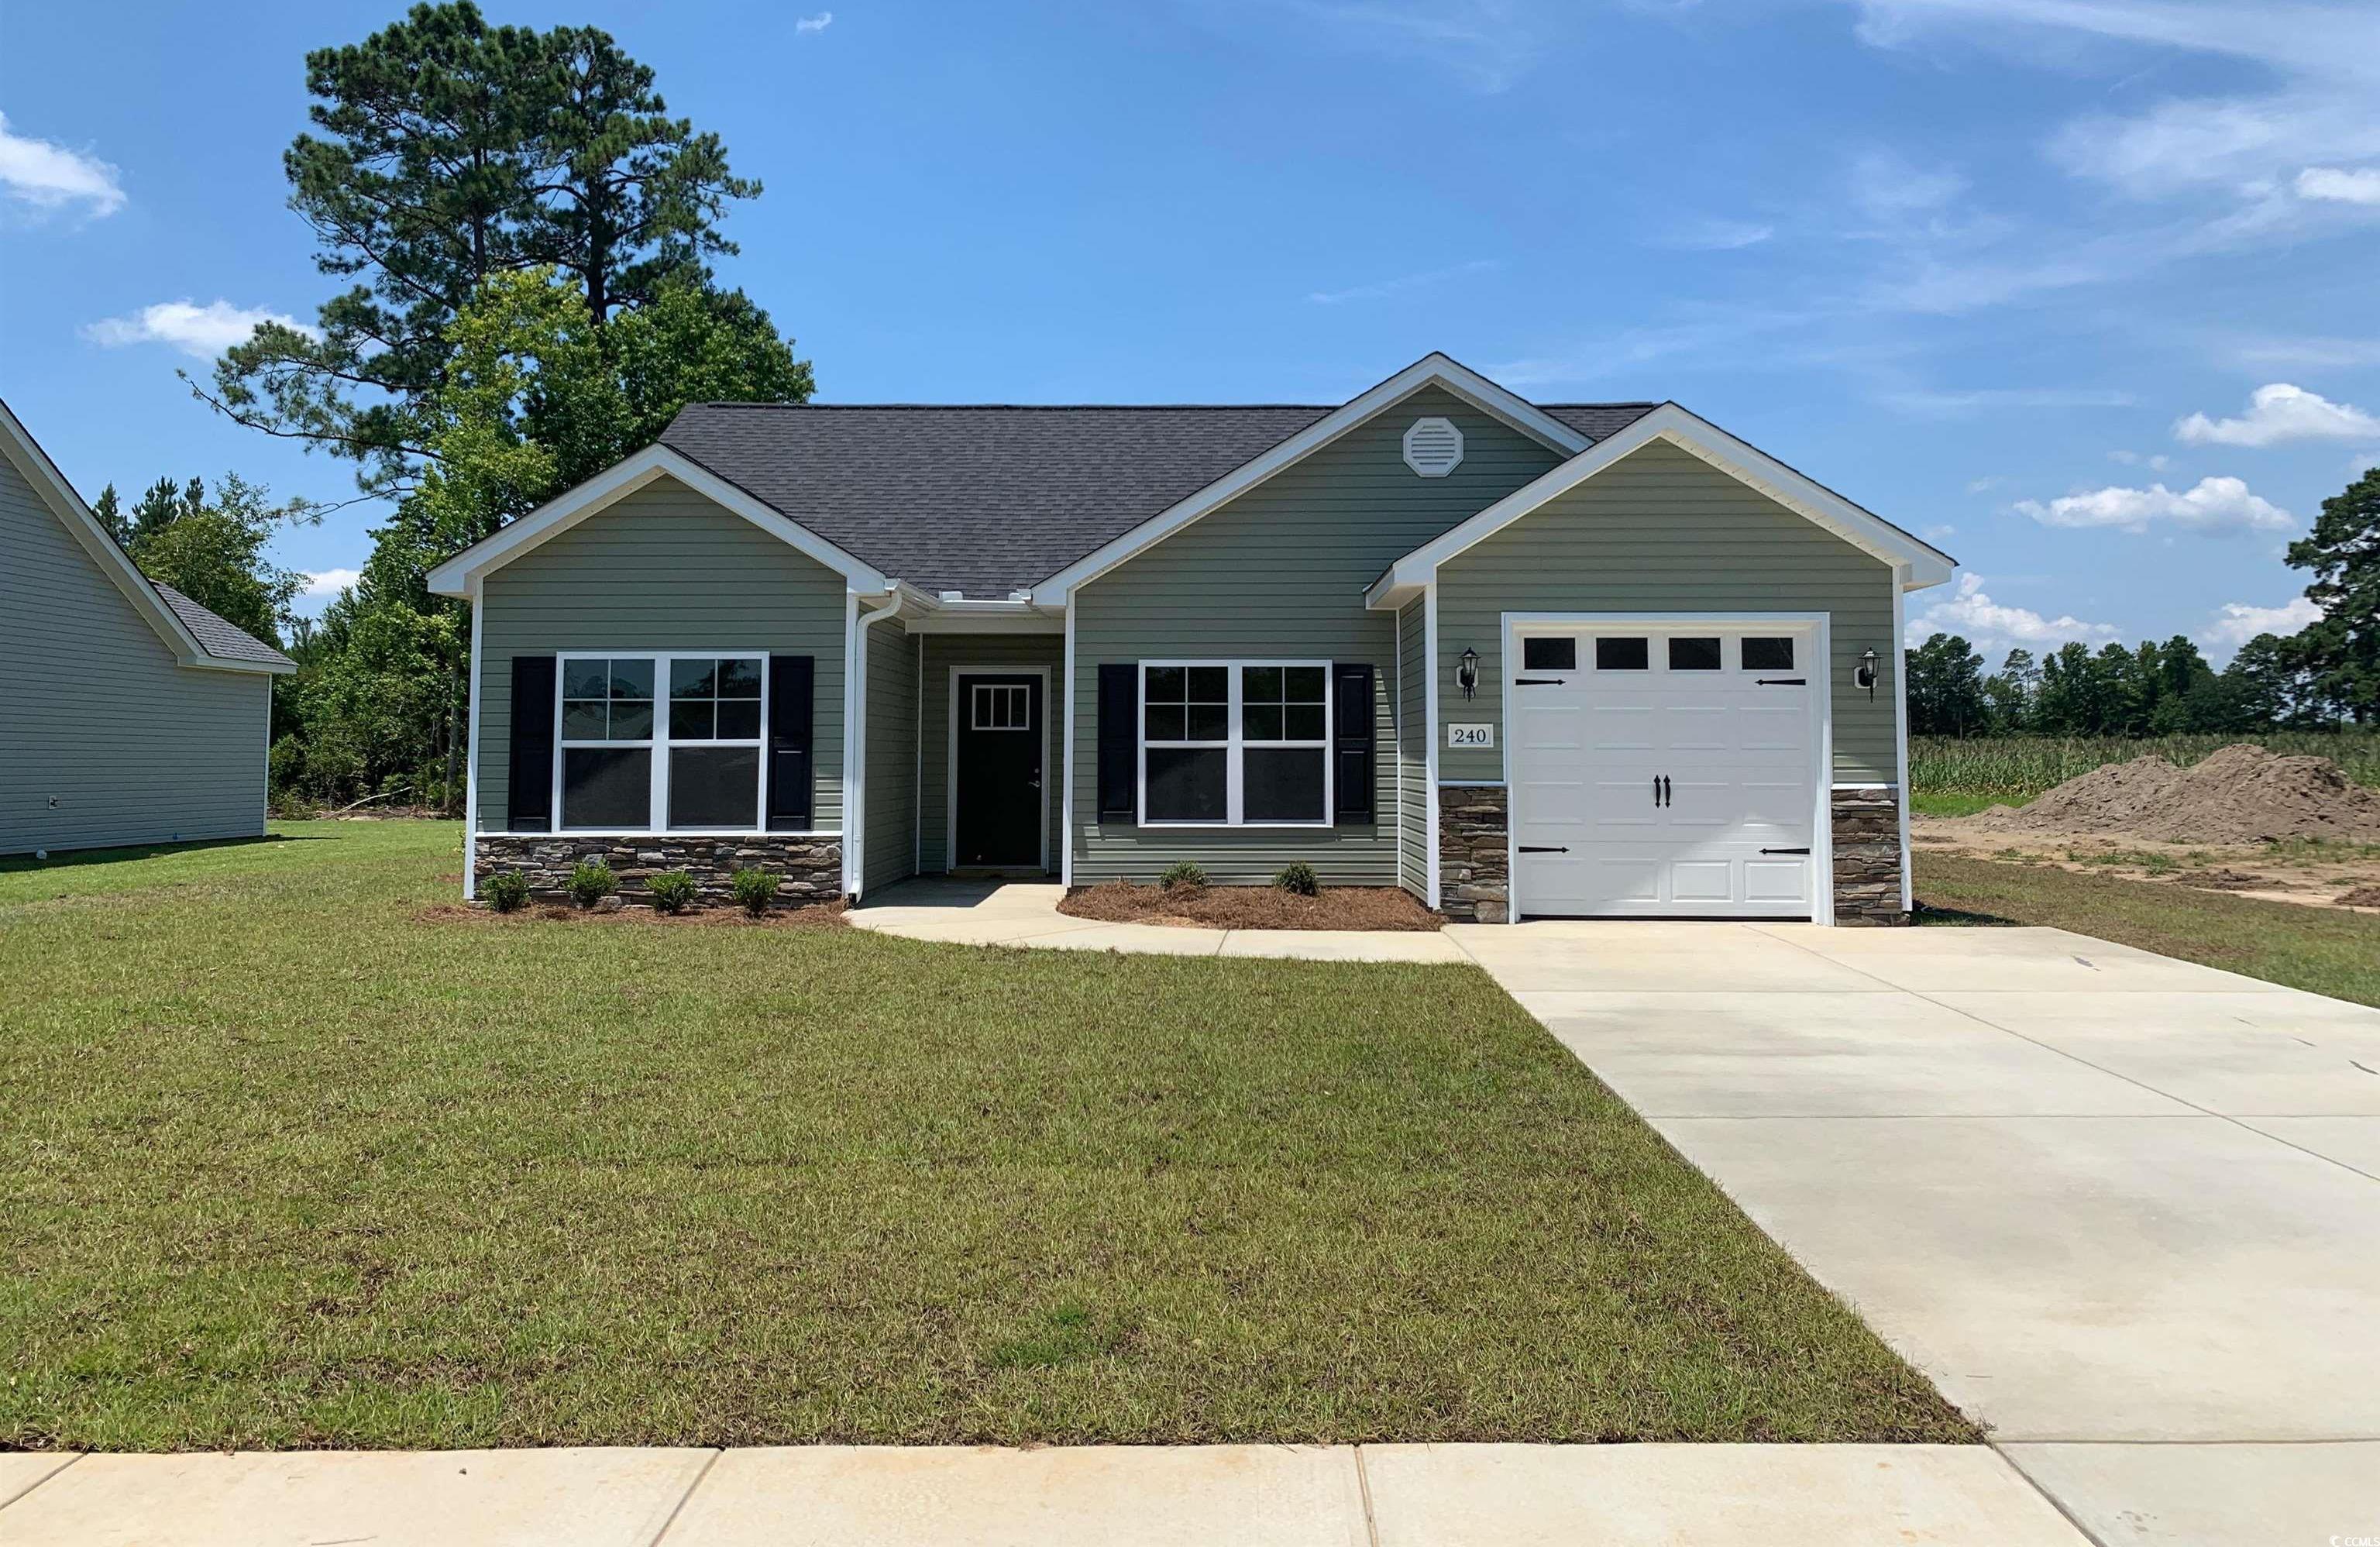 Photo one of 430 Shallow Cove Dr. Conway SC 29527 | MLS 2404985